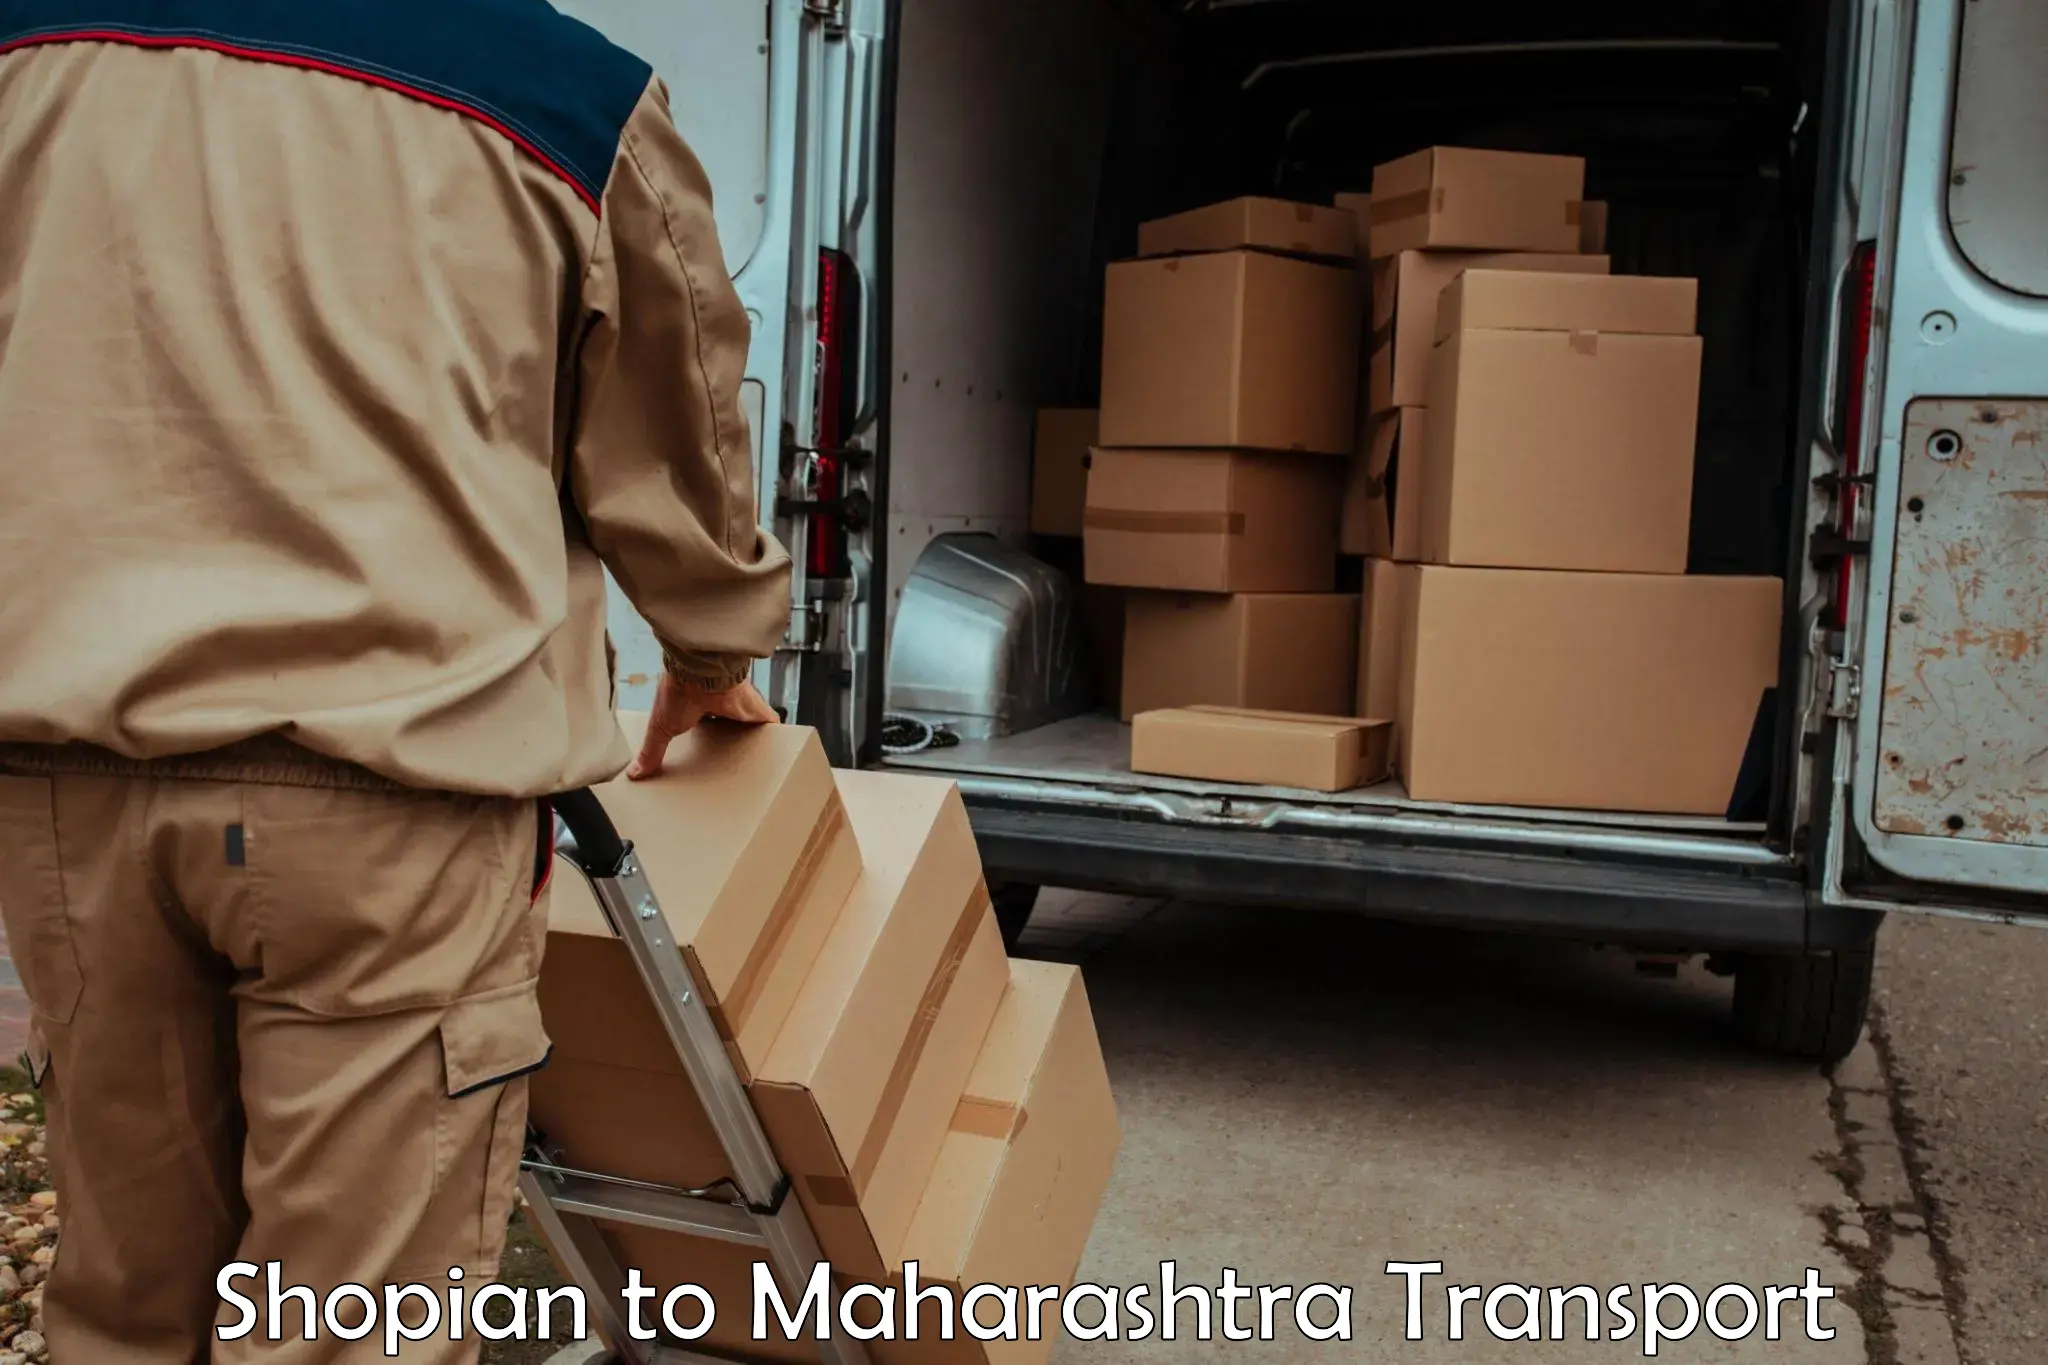 Road transport services Shopian to Vasai